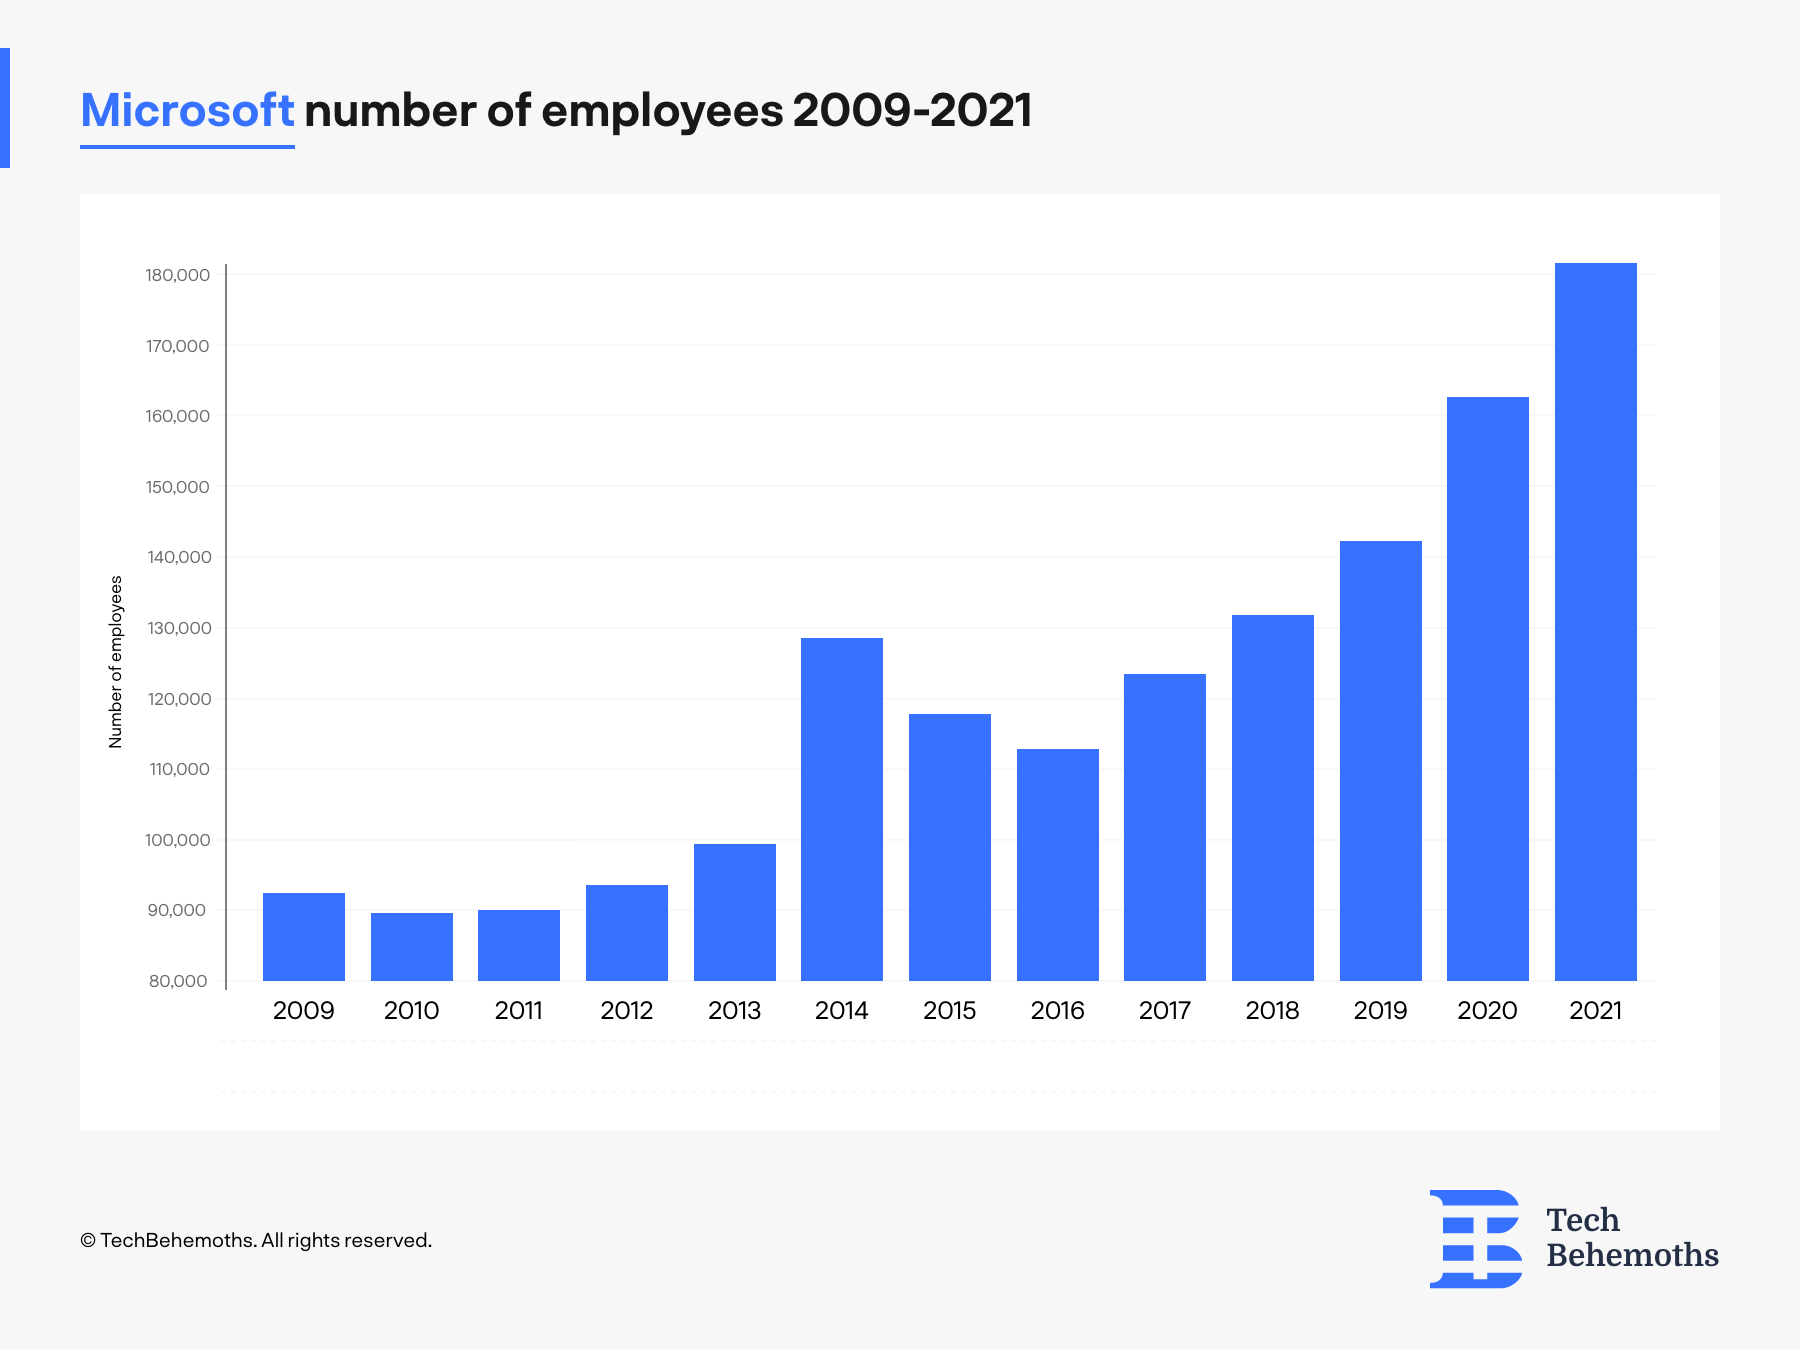 Number of employees at Microsoft between 2009-2021